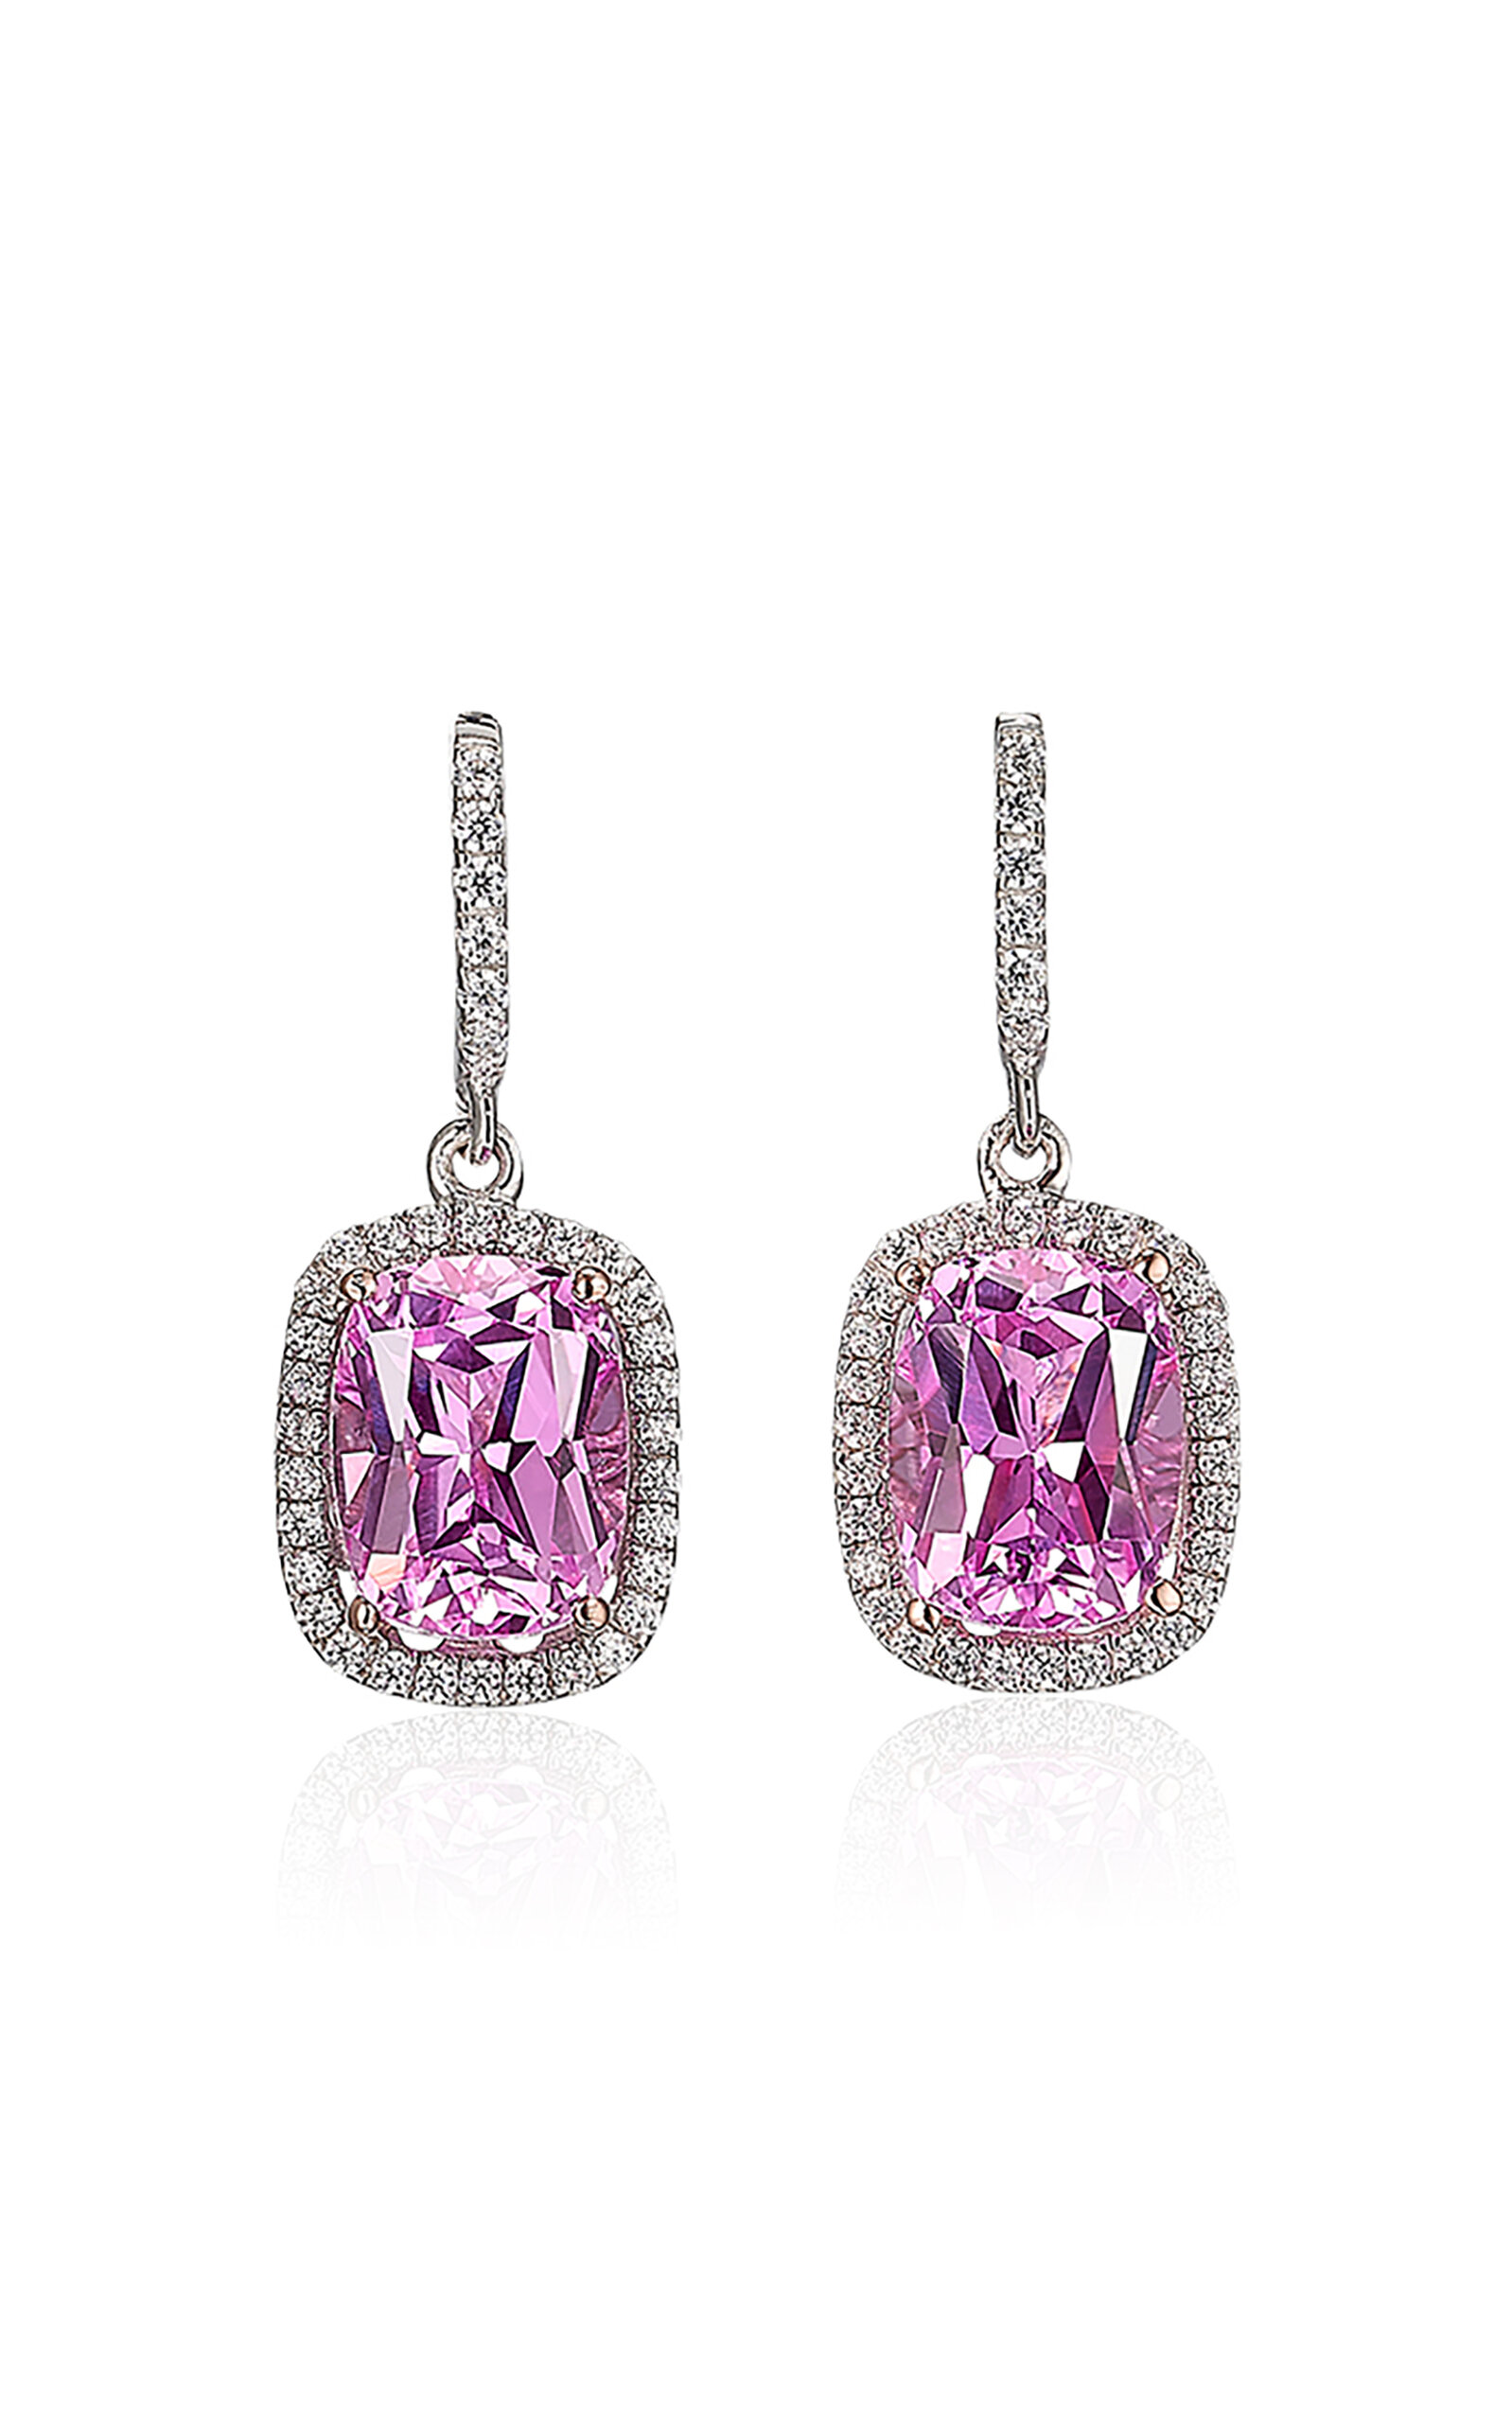 Anabela Chan 18k White Gold Begonia Comet Earrings With Rhodium Vermeil In Pink